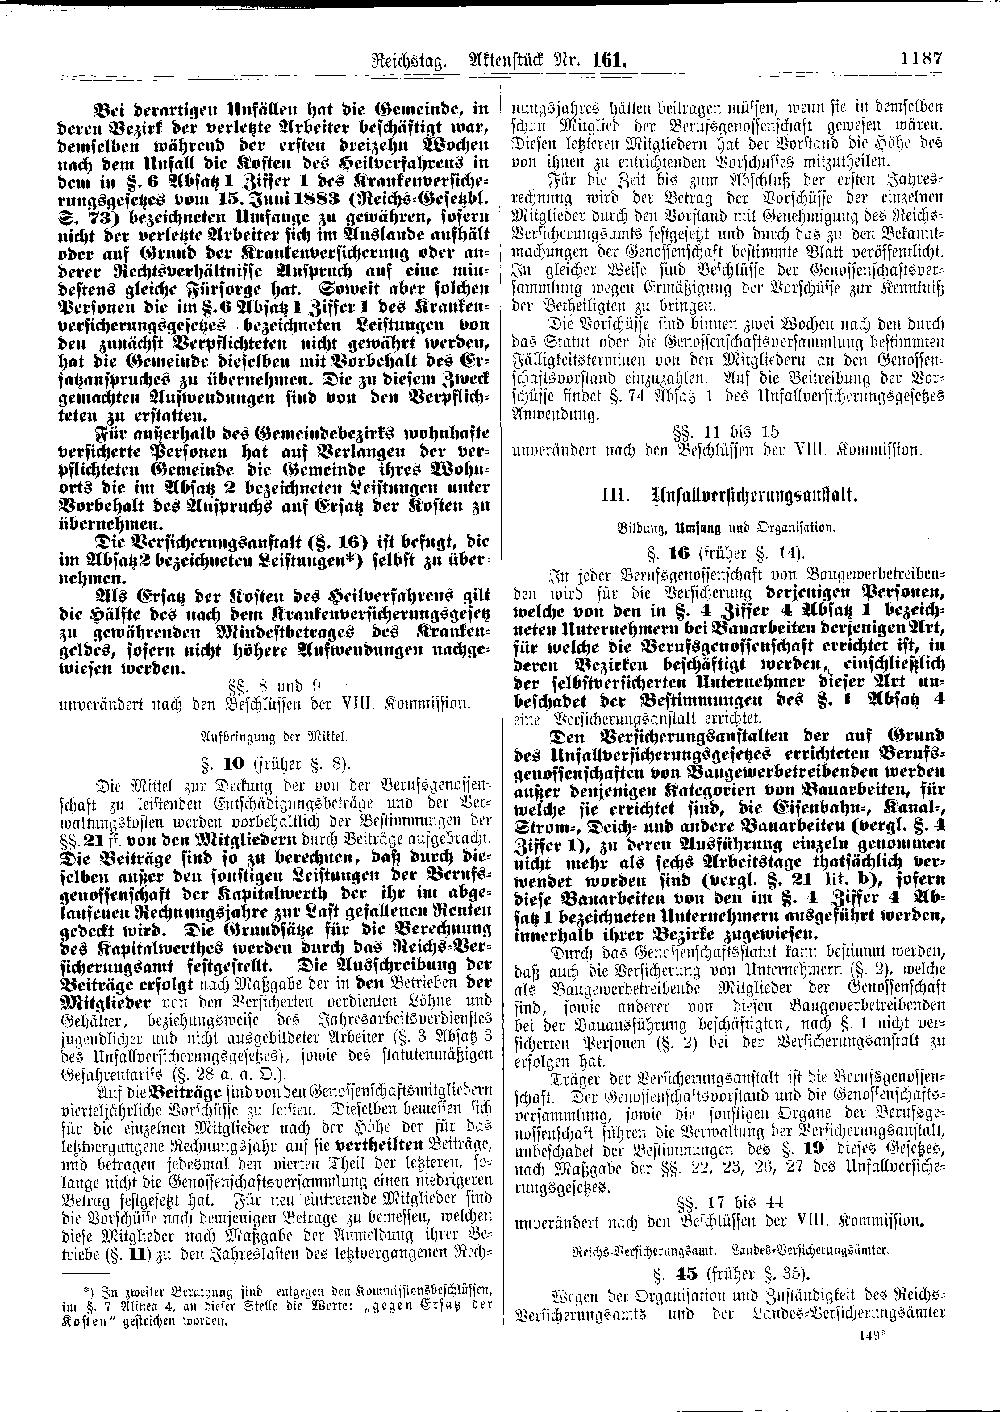 Scan of page 1187